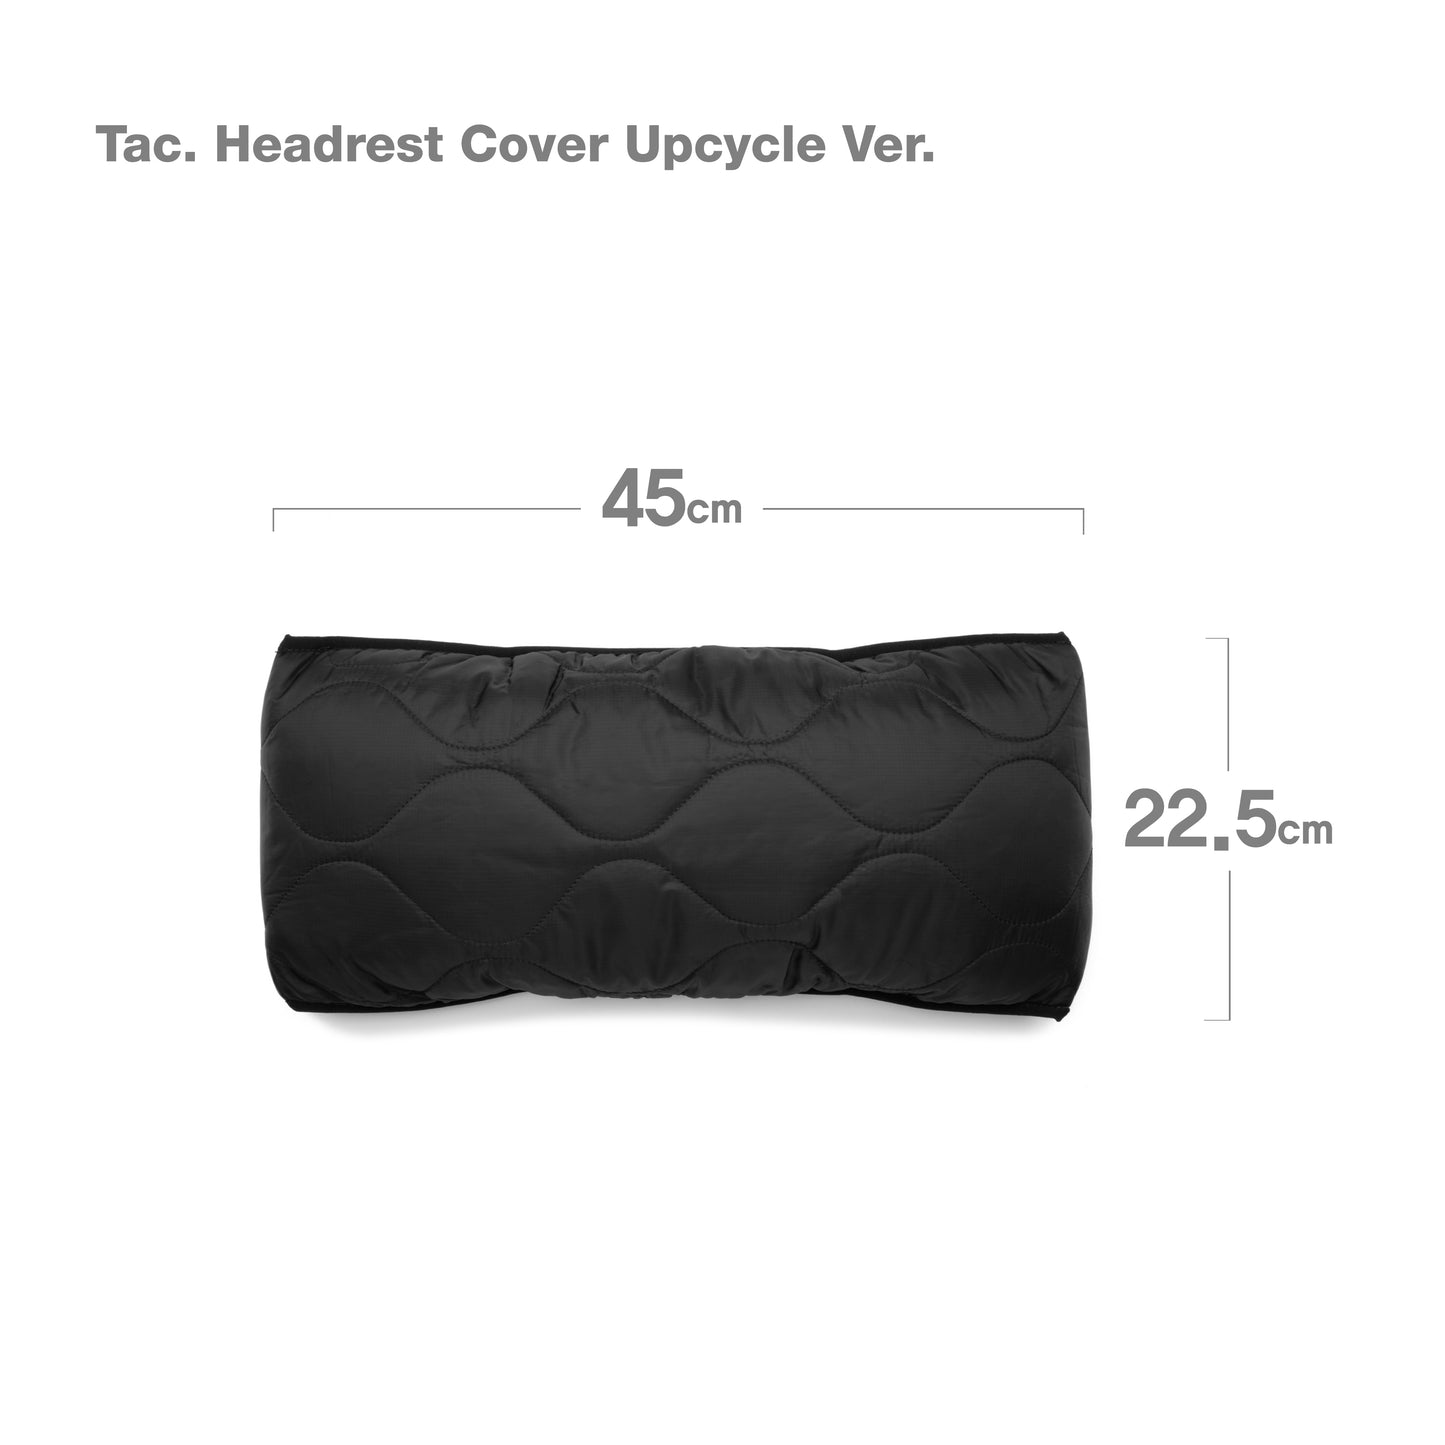 Tac. Headrest Cover / Upcycle ver. - Black / Foliage Green